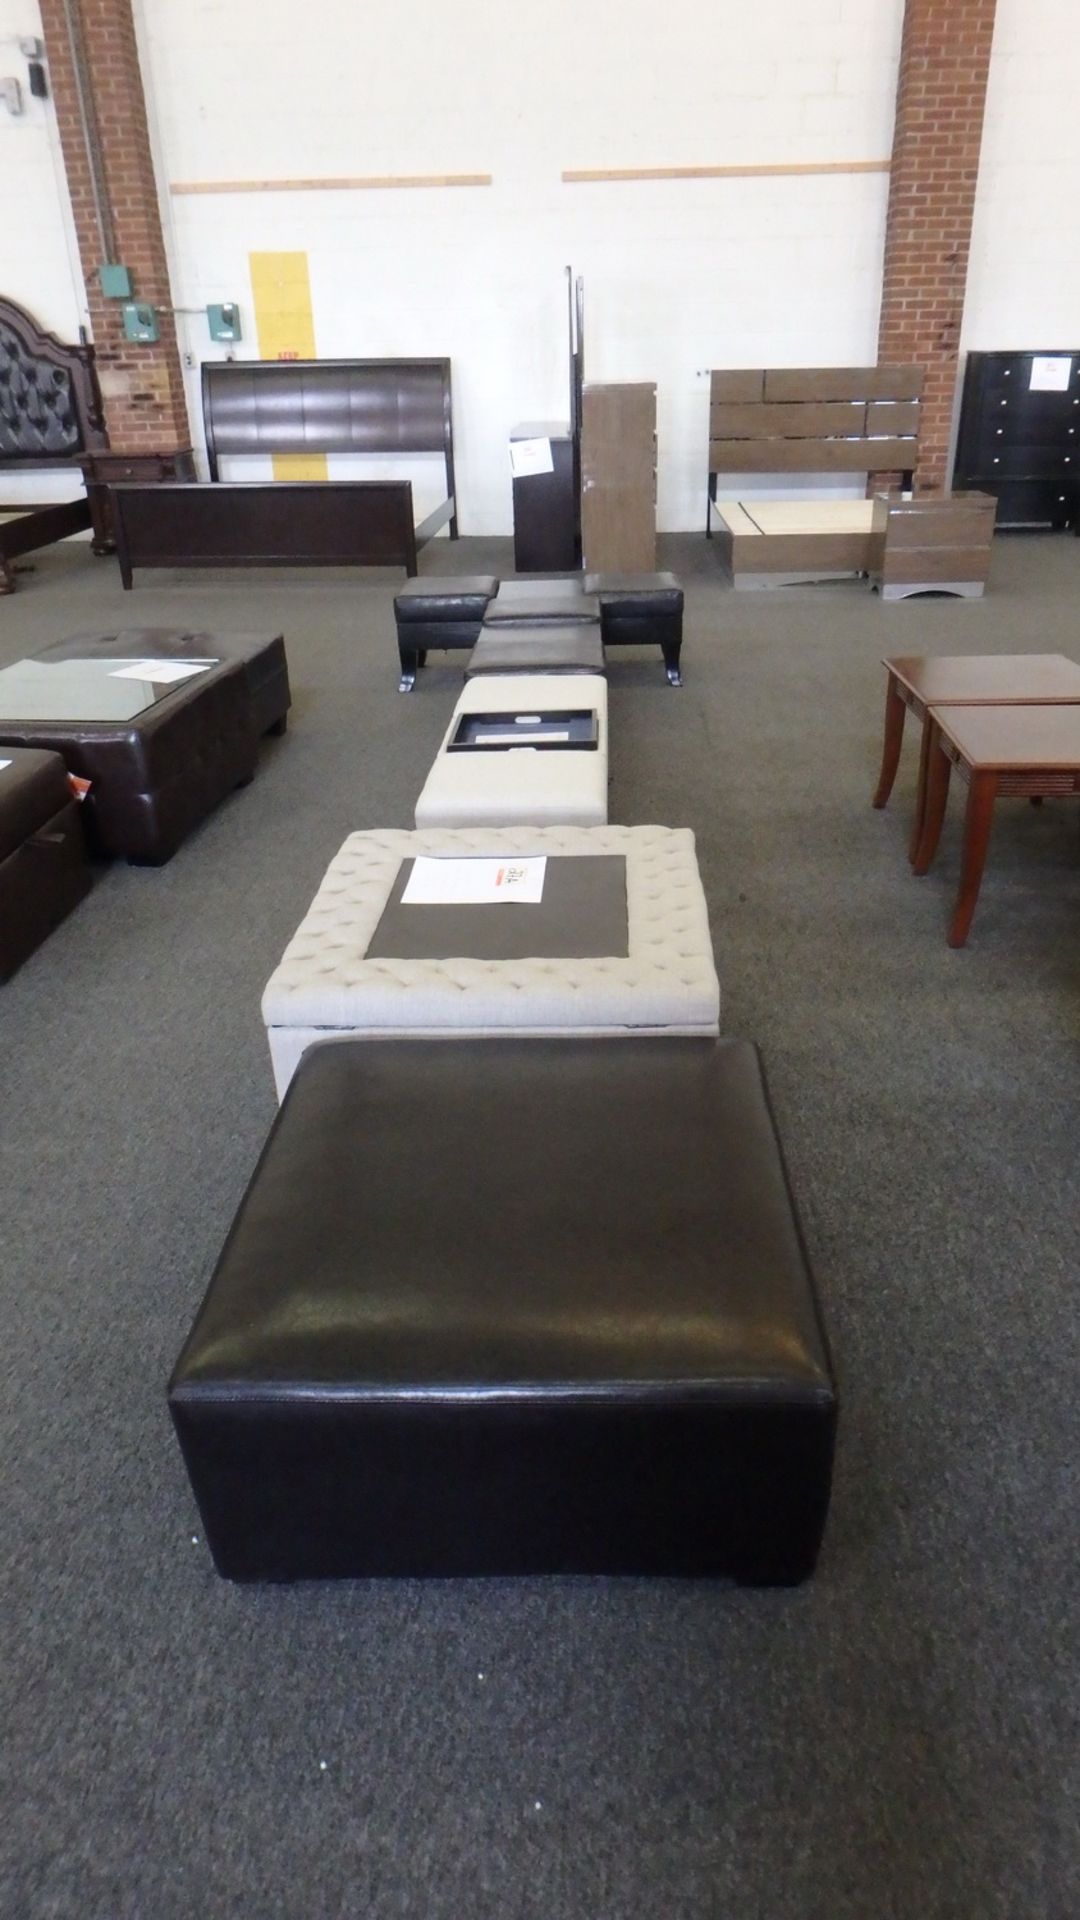 LOT - ASSORTED STORAGE OTTOMANS & BENCHES (FLOOR DISPLAYS) (12 UNITS)